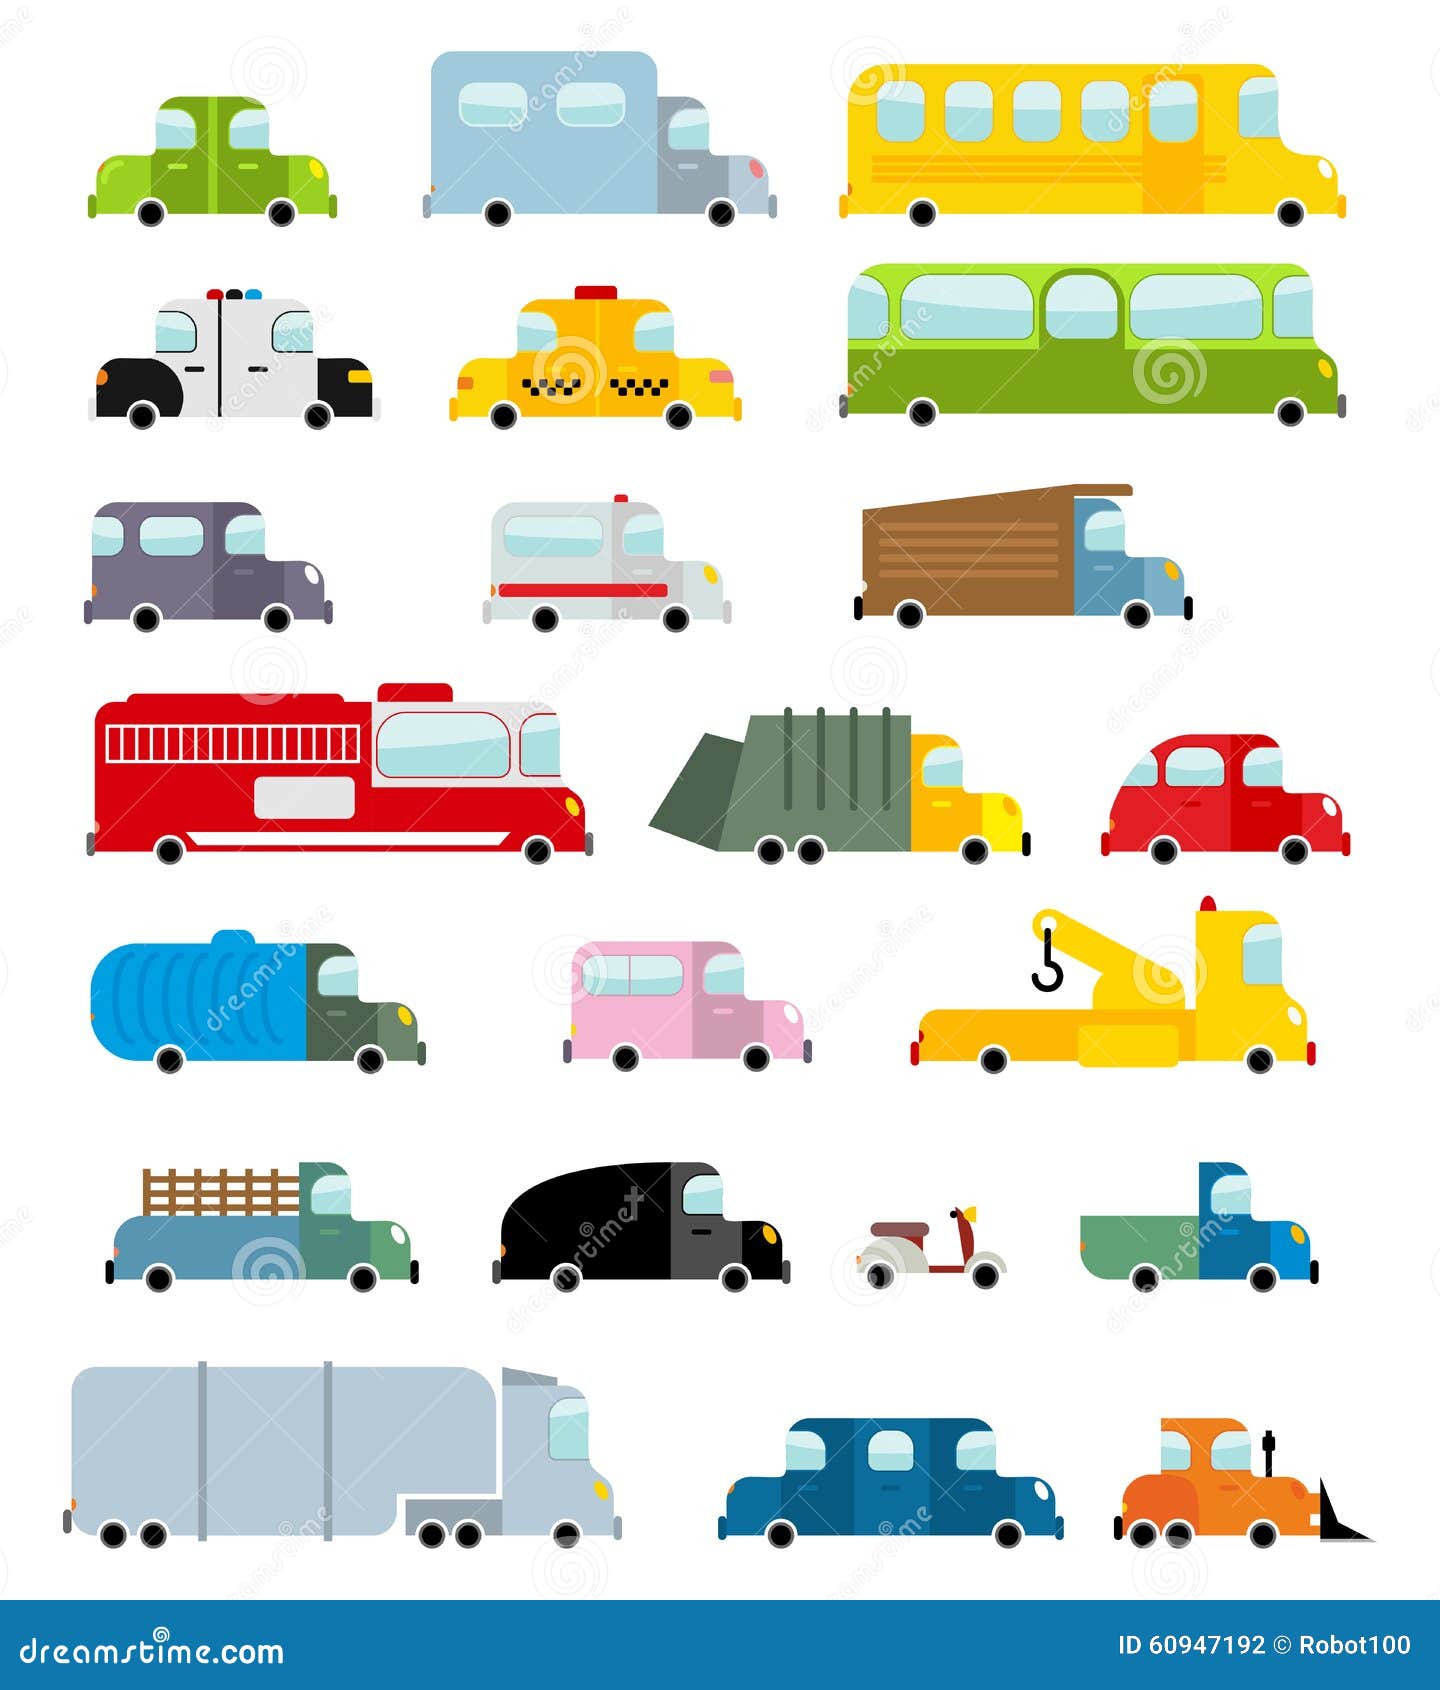 mr clipart car'n truck collection - photo #22